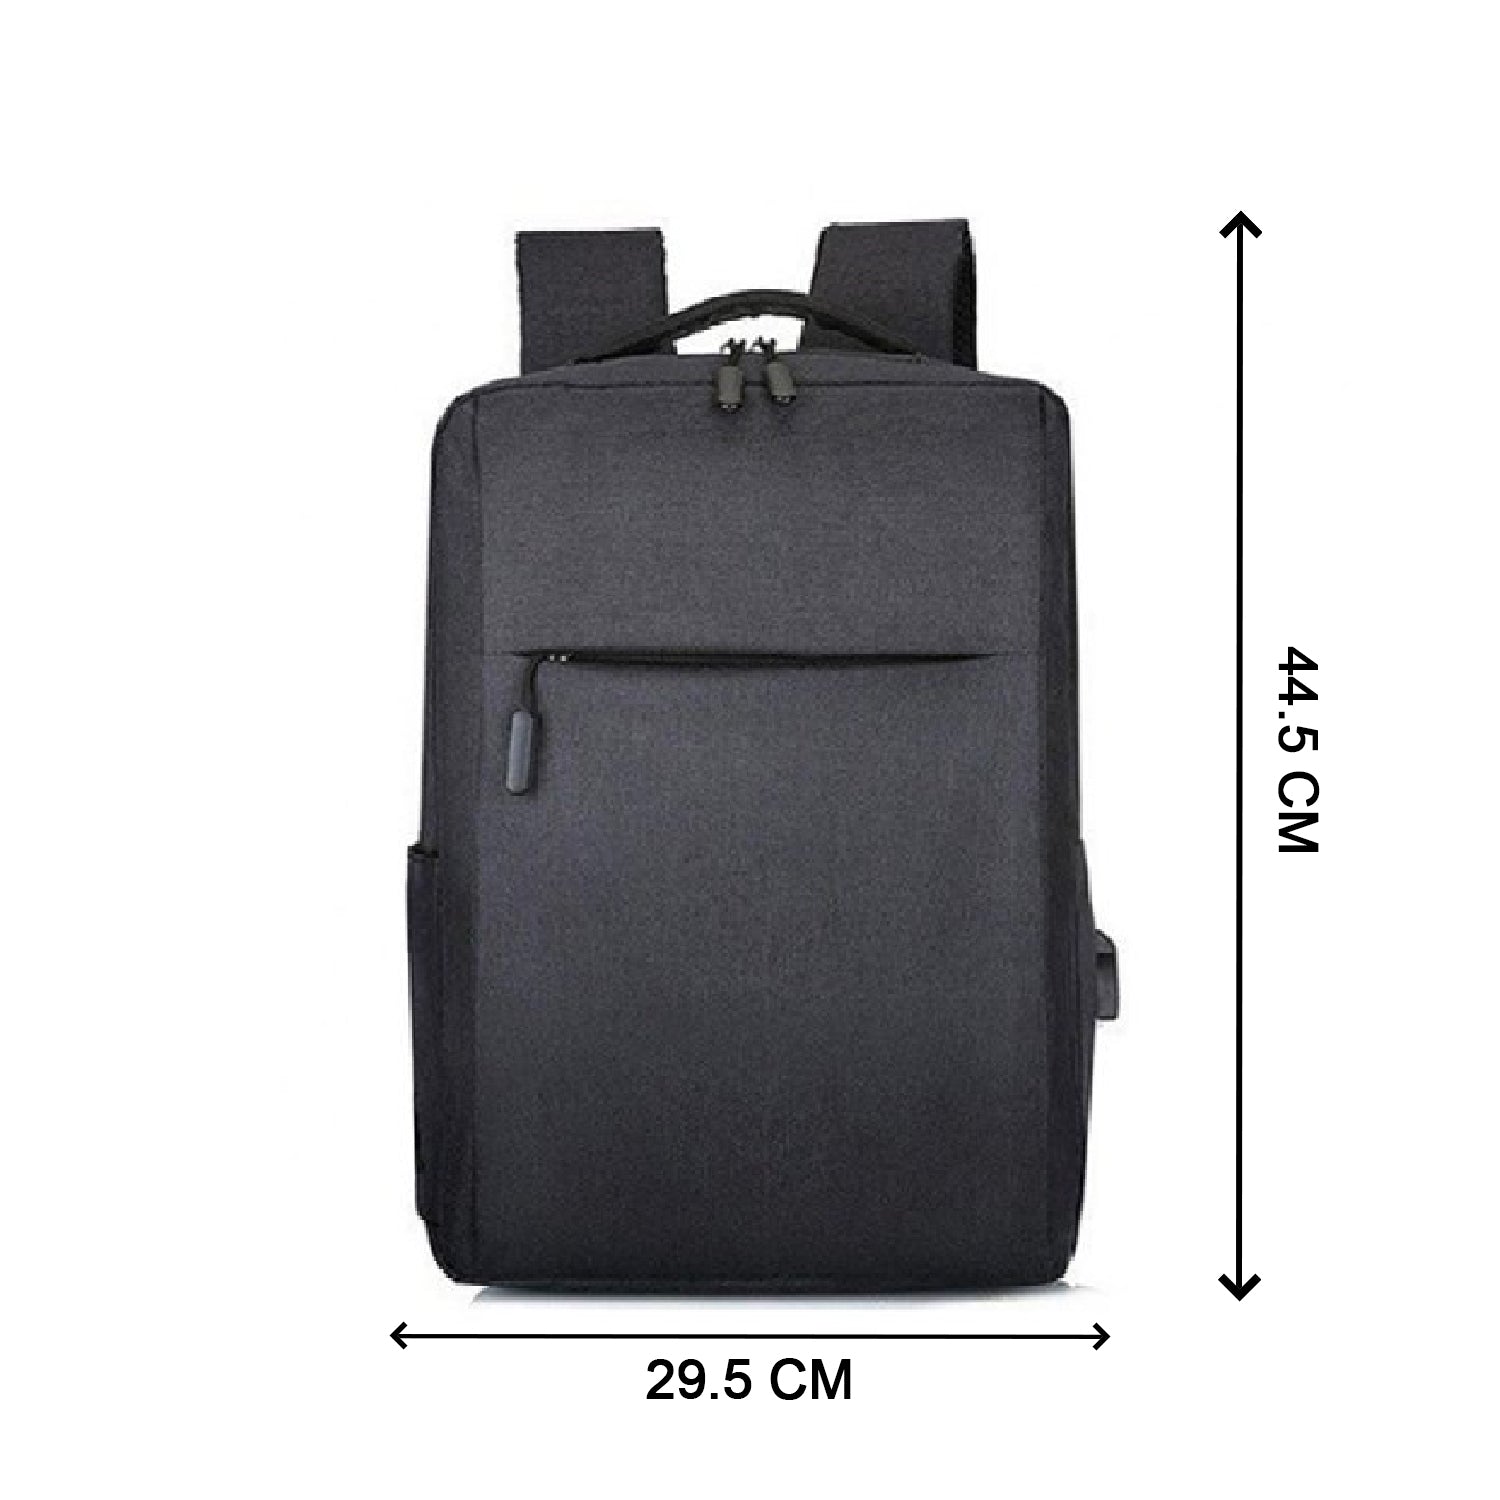 6208 Black Travel Laptop Backpack with USB Charging Port DeoDap